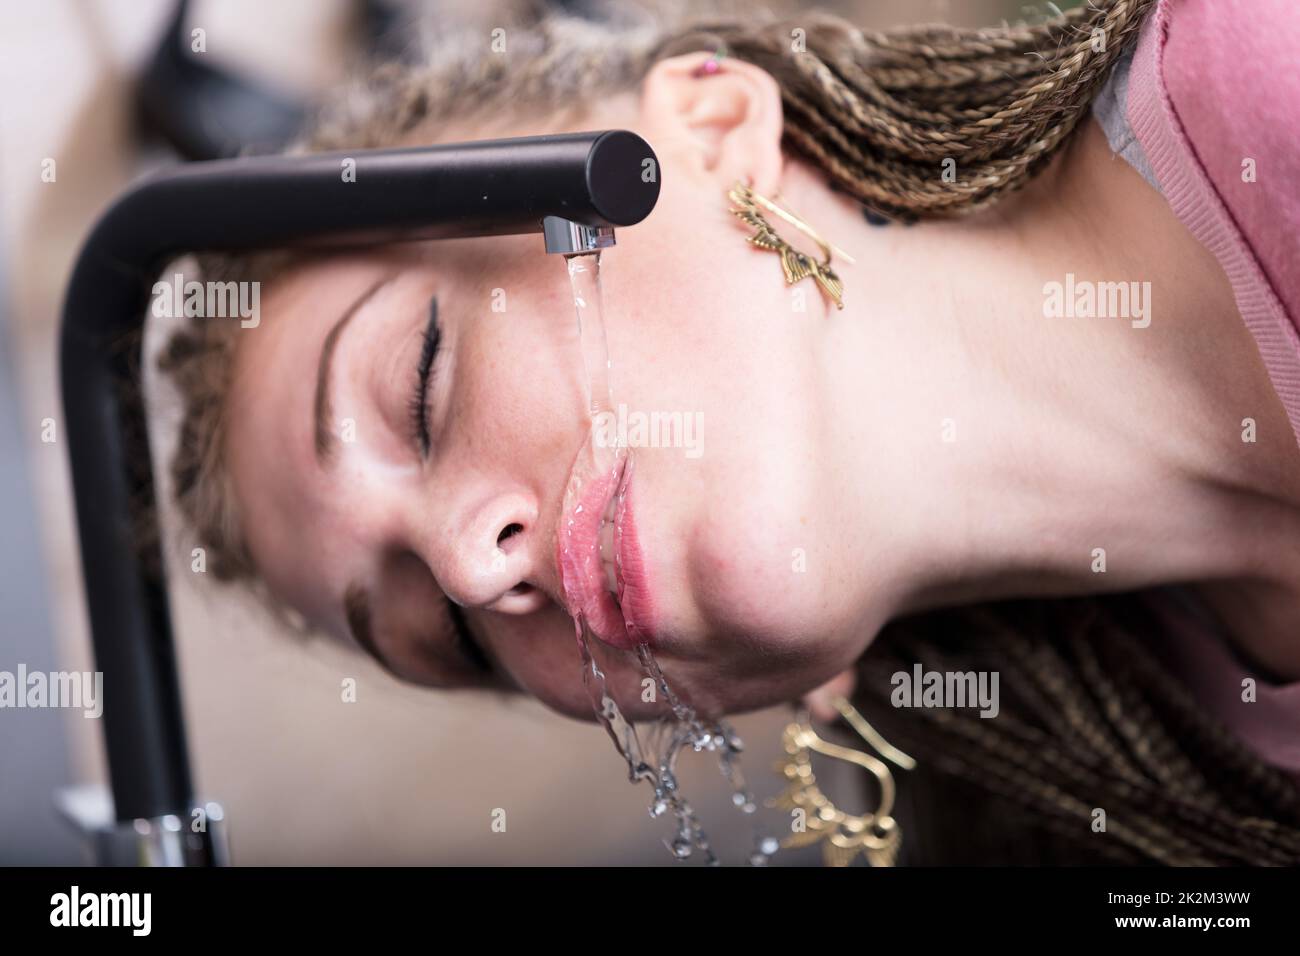 Attractive woman drinking water from a tap Stock Photo